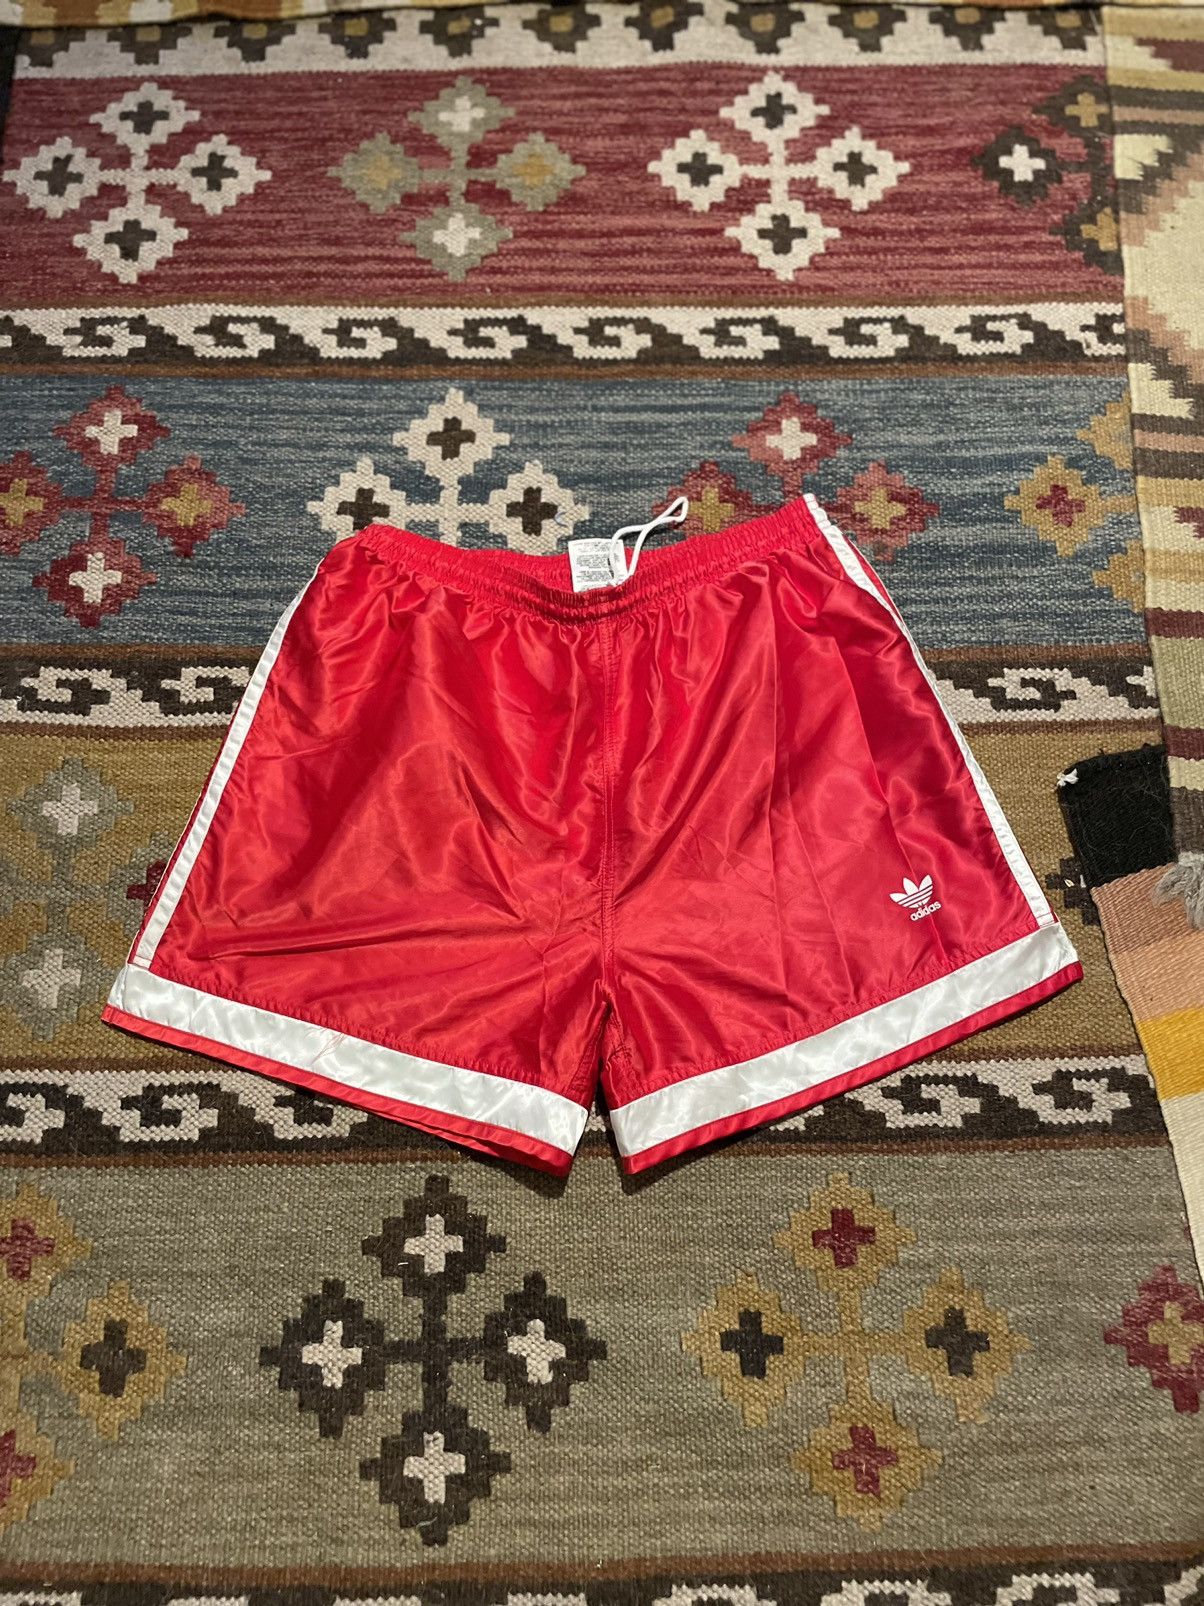 Adidas Vintage adidas satin shorts made in usa 90s Size US 32 / EU 48 - 1 Preview